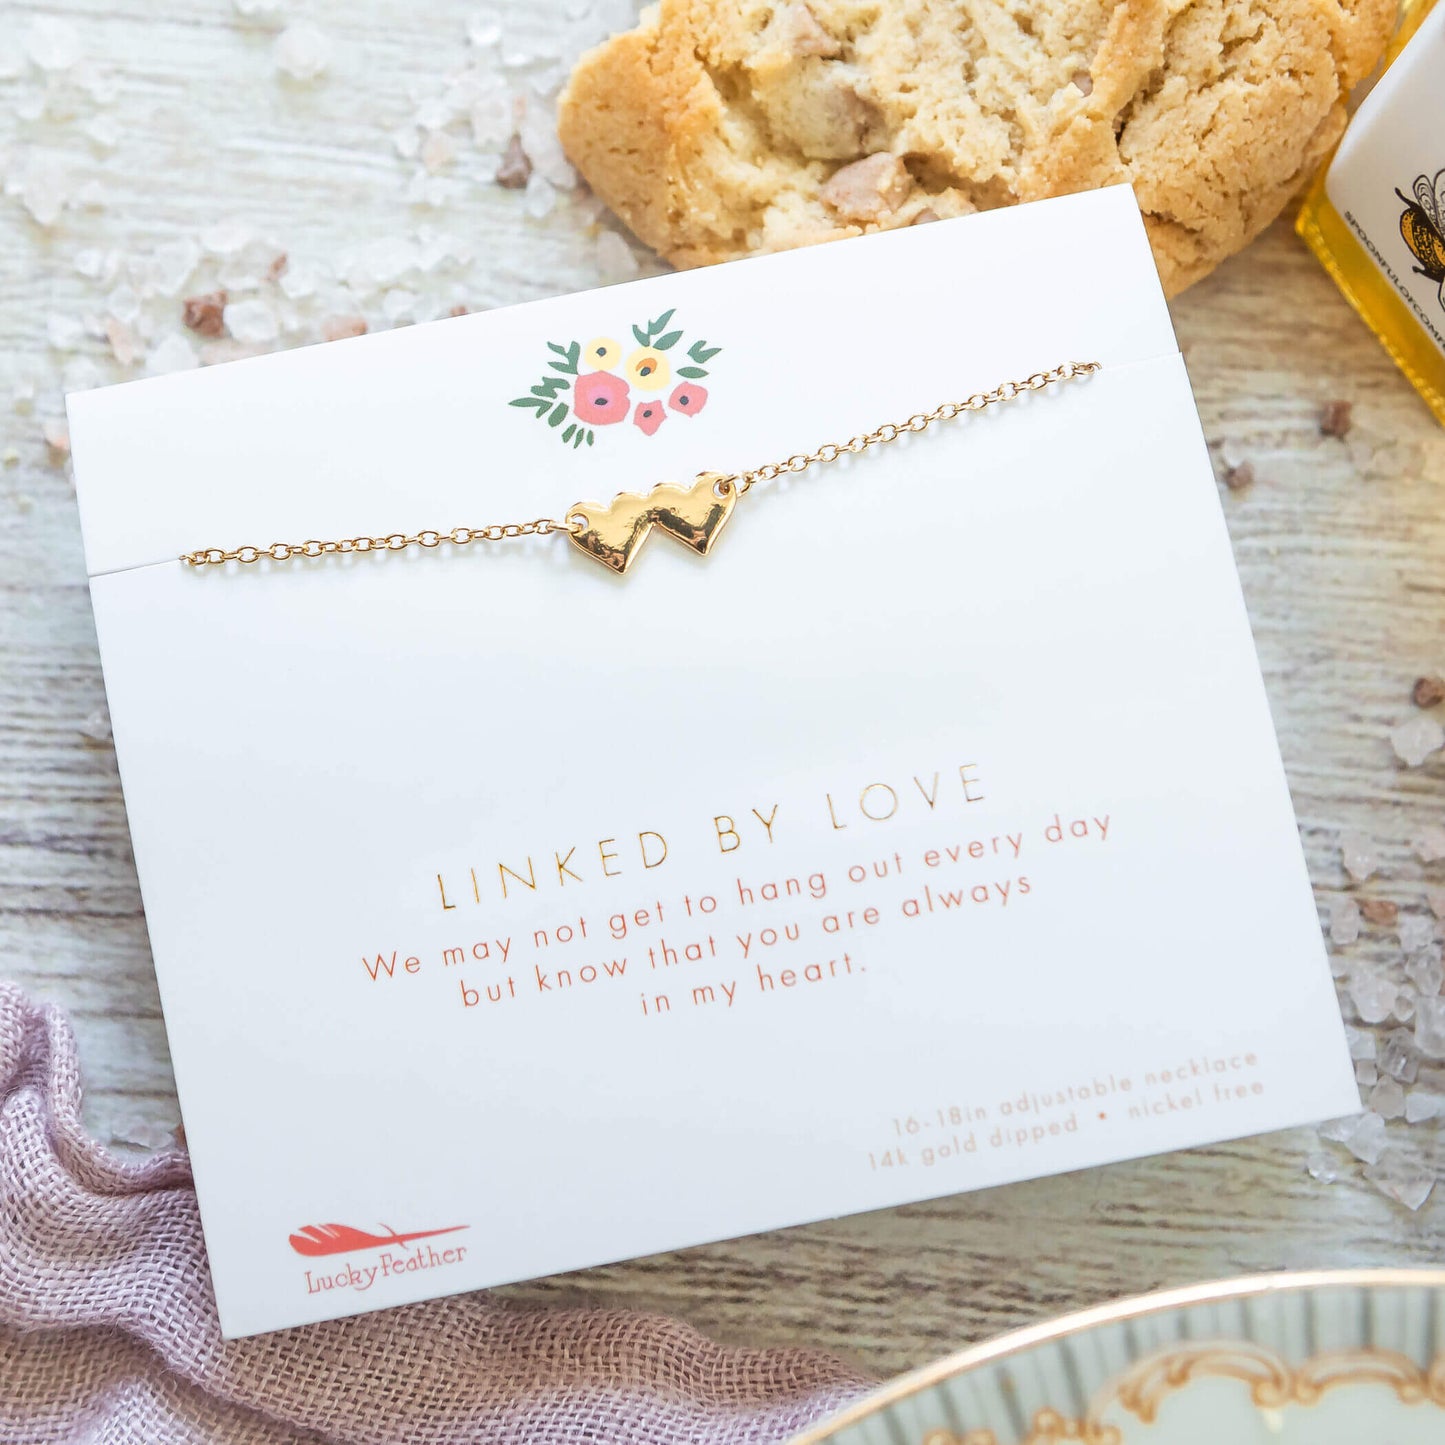 Linked By Love Necklace. Two heart conjoined on a chain. Linked By love we may not get to hand out everyday but know you always in my heart. 16-18 in. adjustable necklace. 14 k gold dipped nickel free